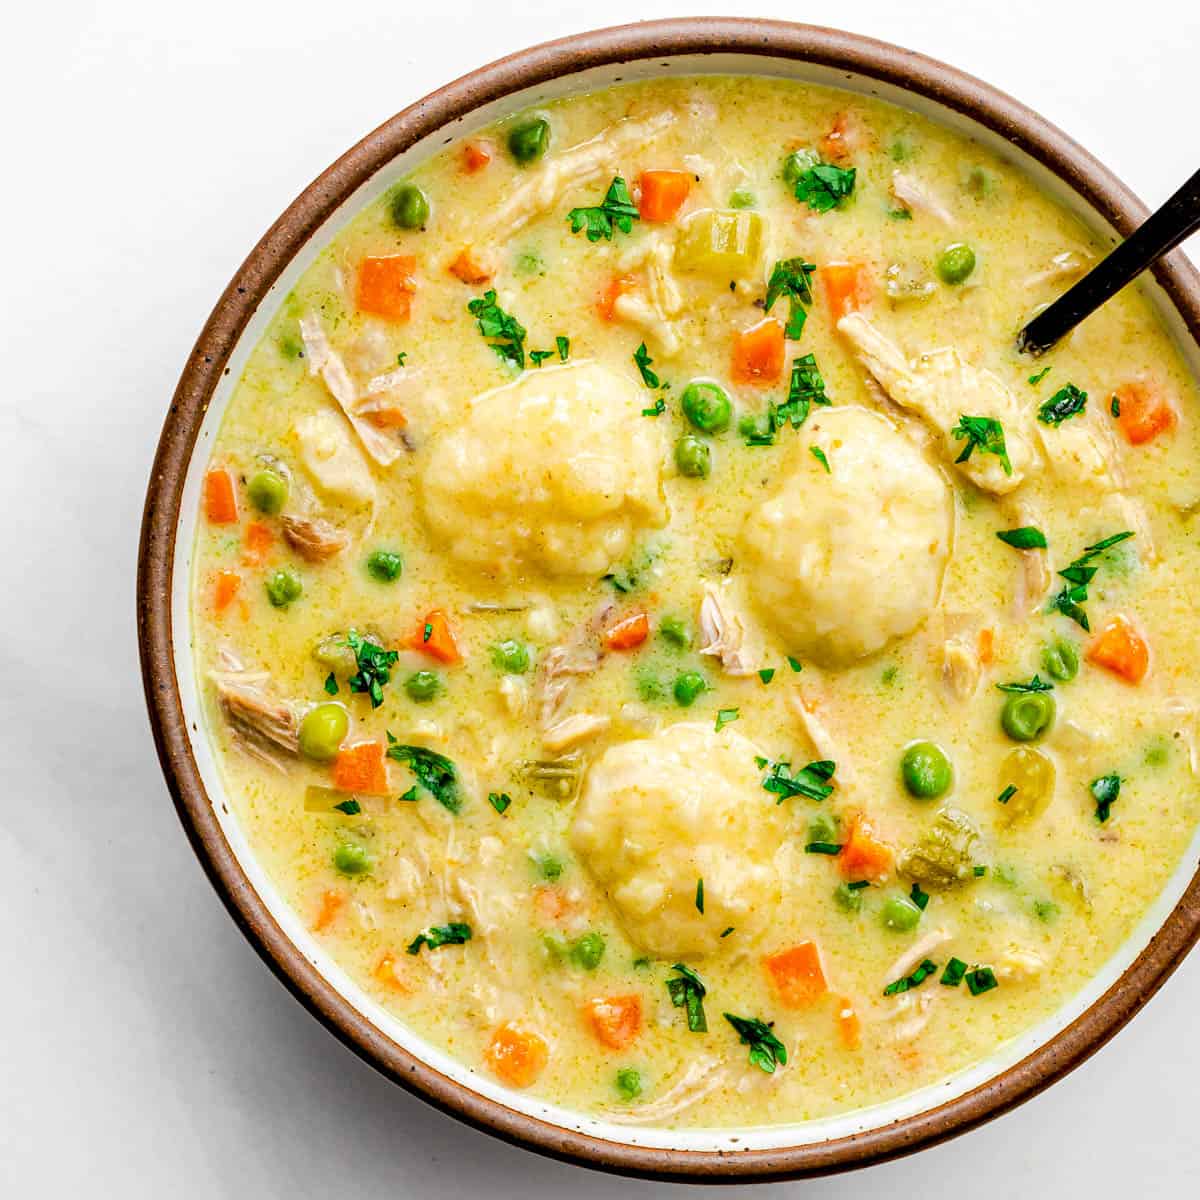 How To Store Leftover Chicken And Dumplings